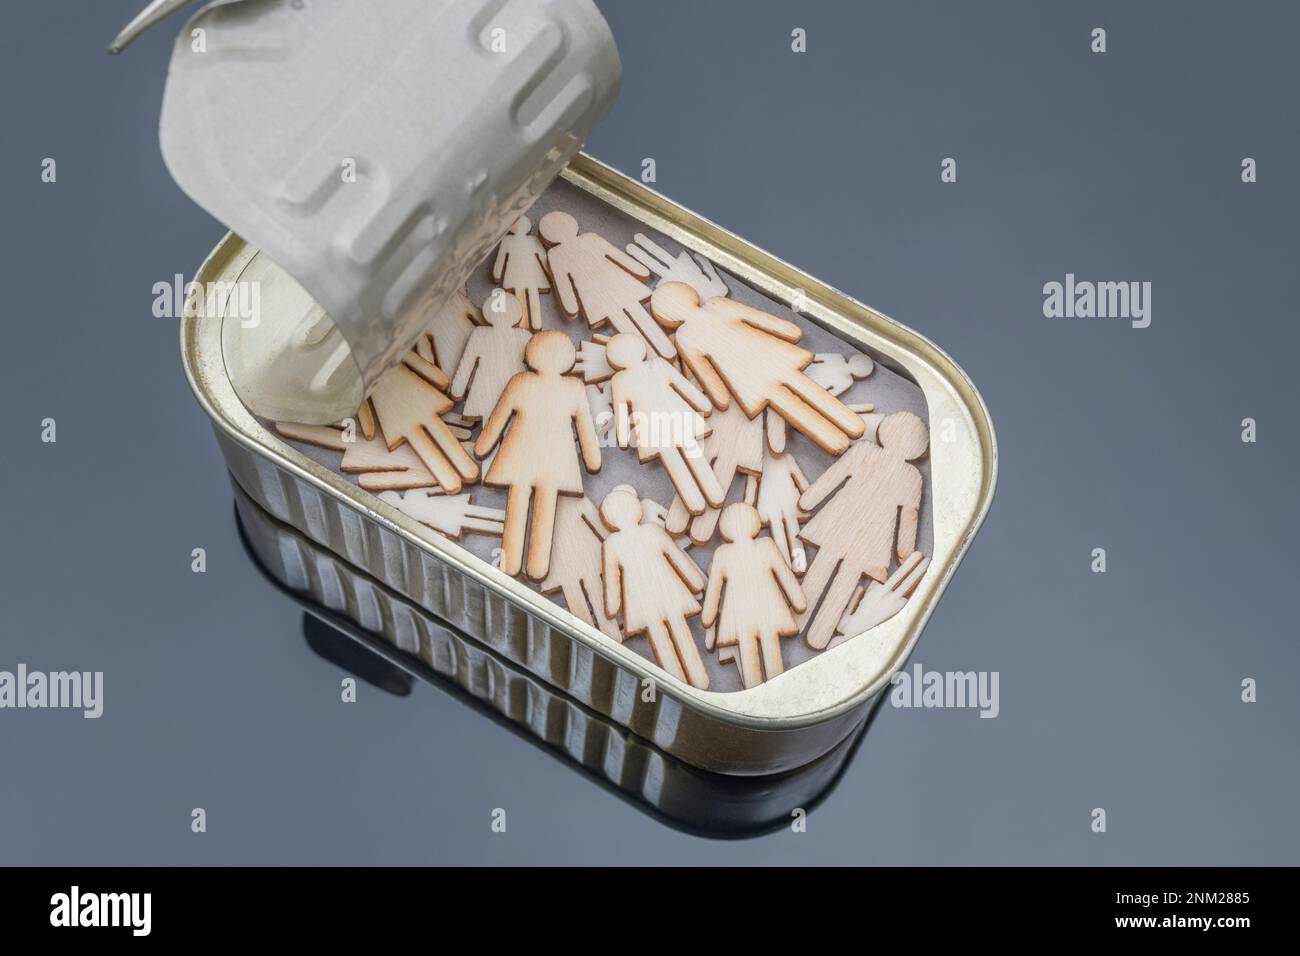 Female laser-cut wooden figures squashed into a sardine tin. Possibly for female gender politics, LGBT etc. concept. Stock Photo